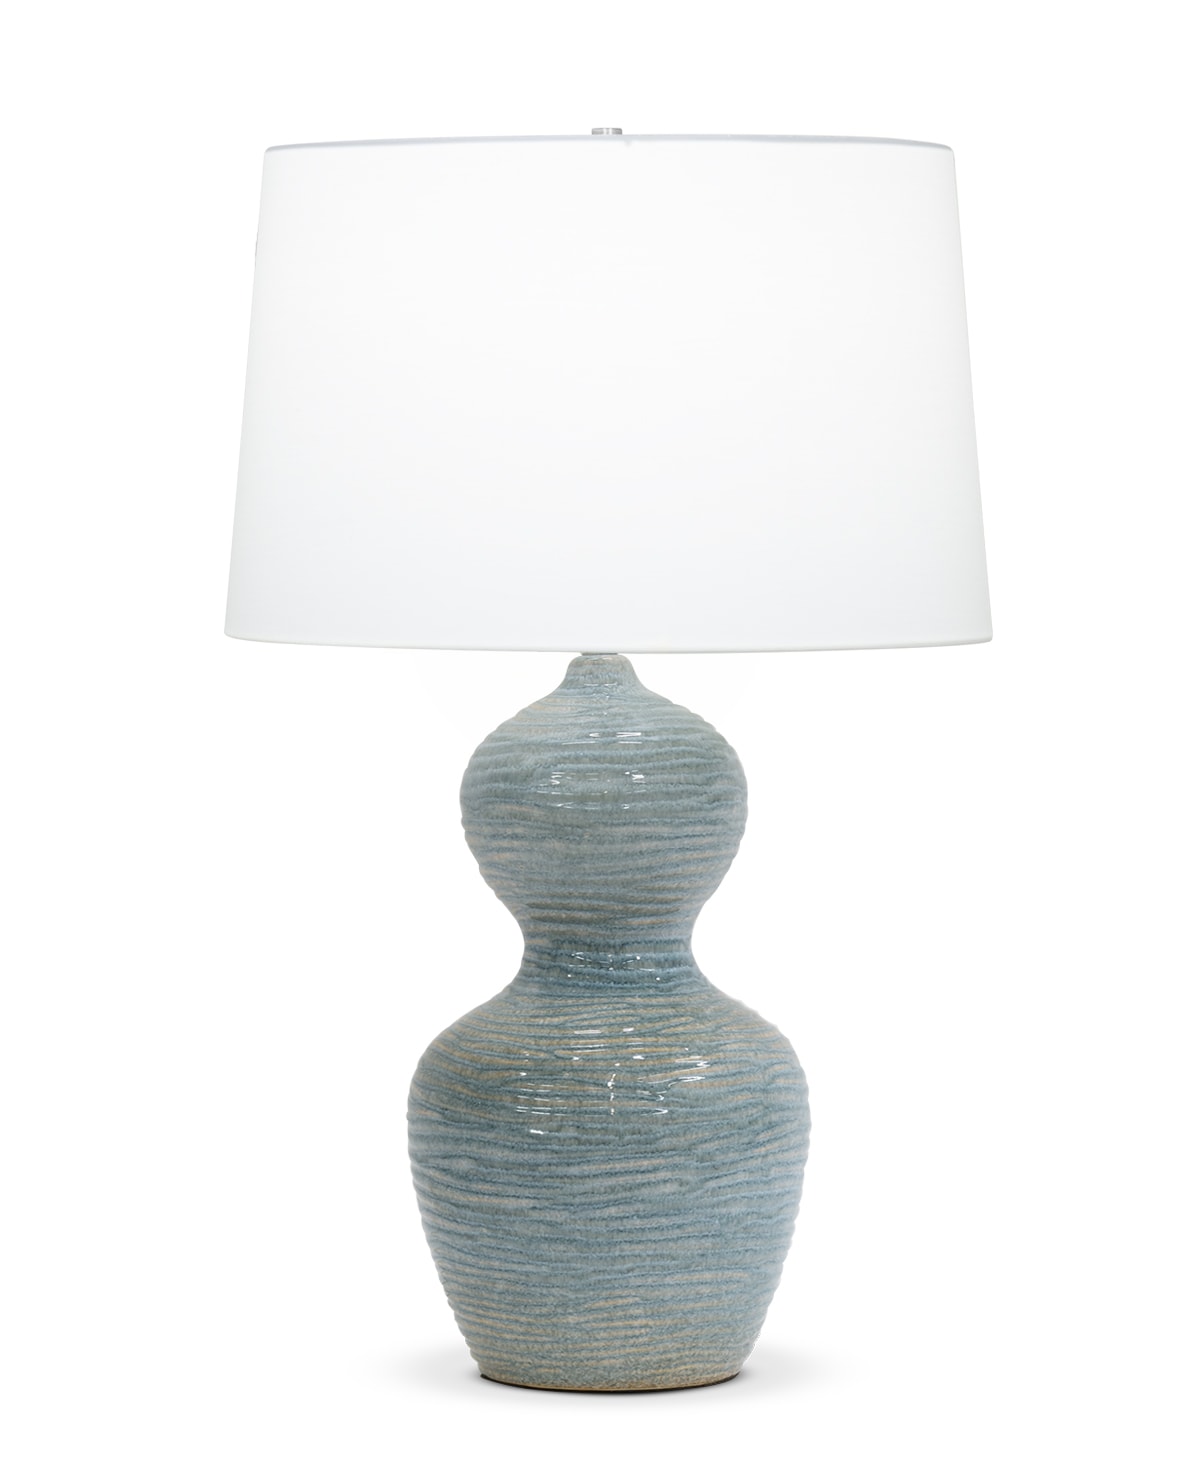 FlowDecor Theresa Table Lamp in ceramic with blue & sand finish and off-white cotton tapered drum shade (# 4572)